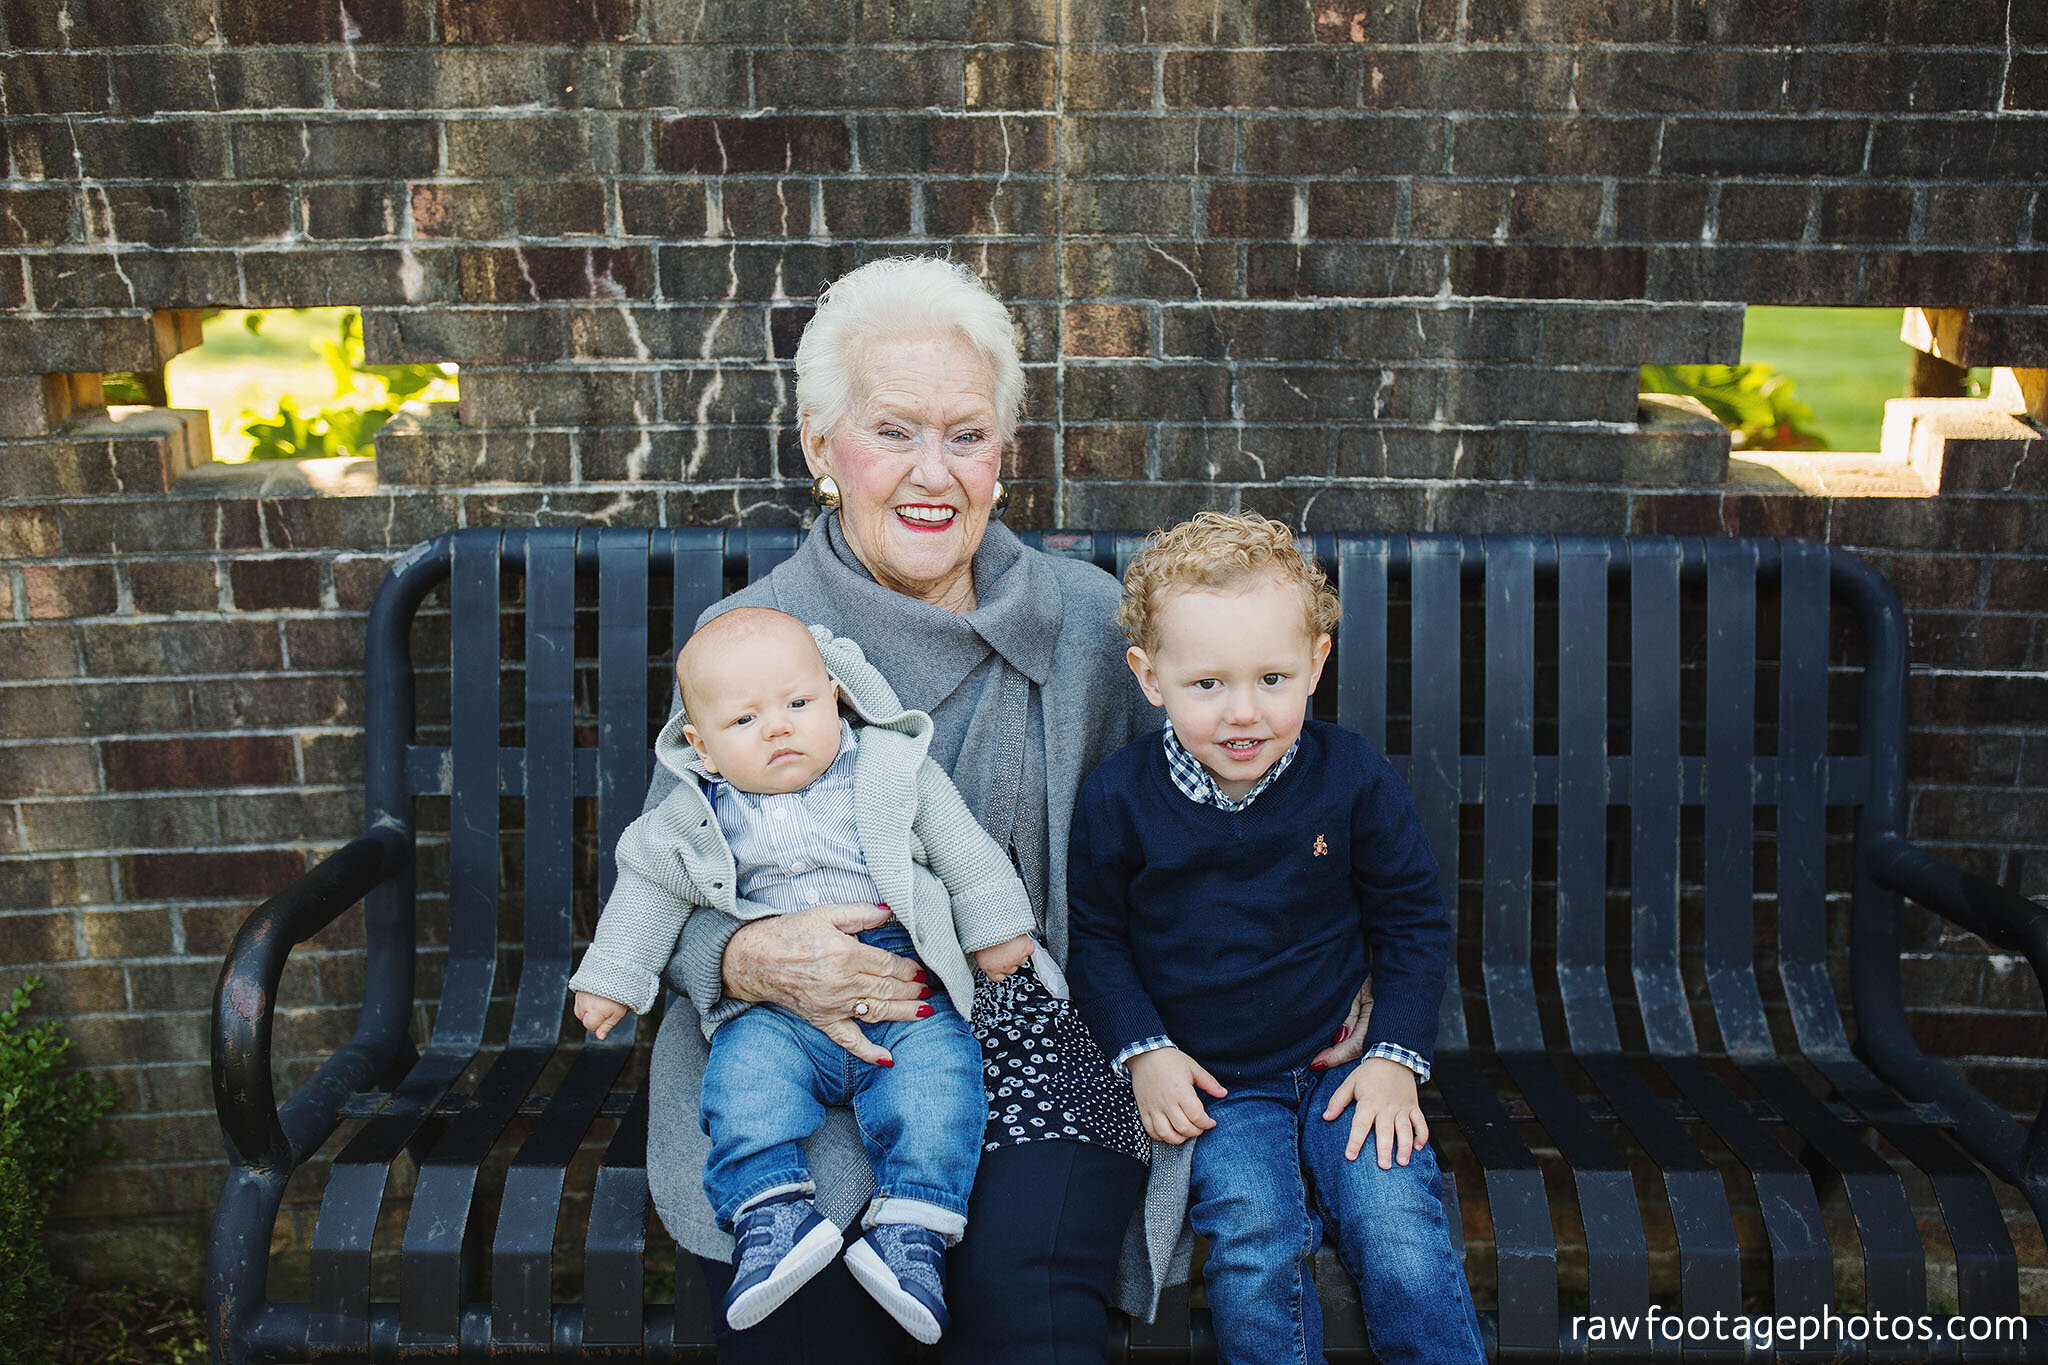 raw_footage_photography-london_ontario_family_photographer-fall_extended_family_session-grandparents-005.jpg